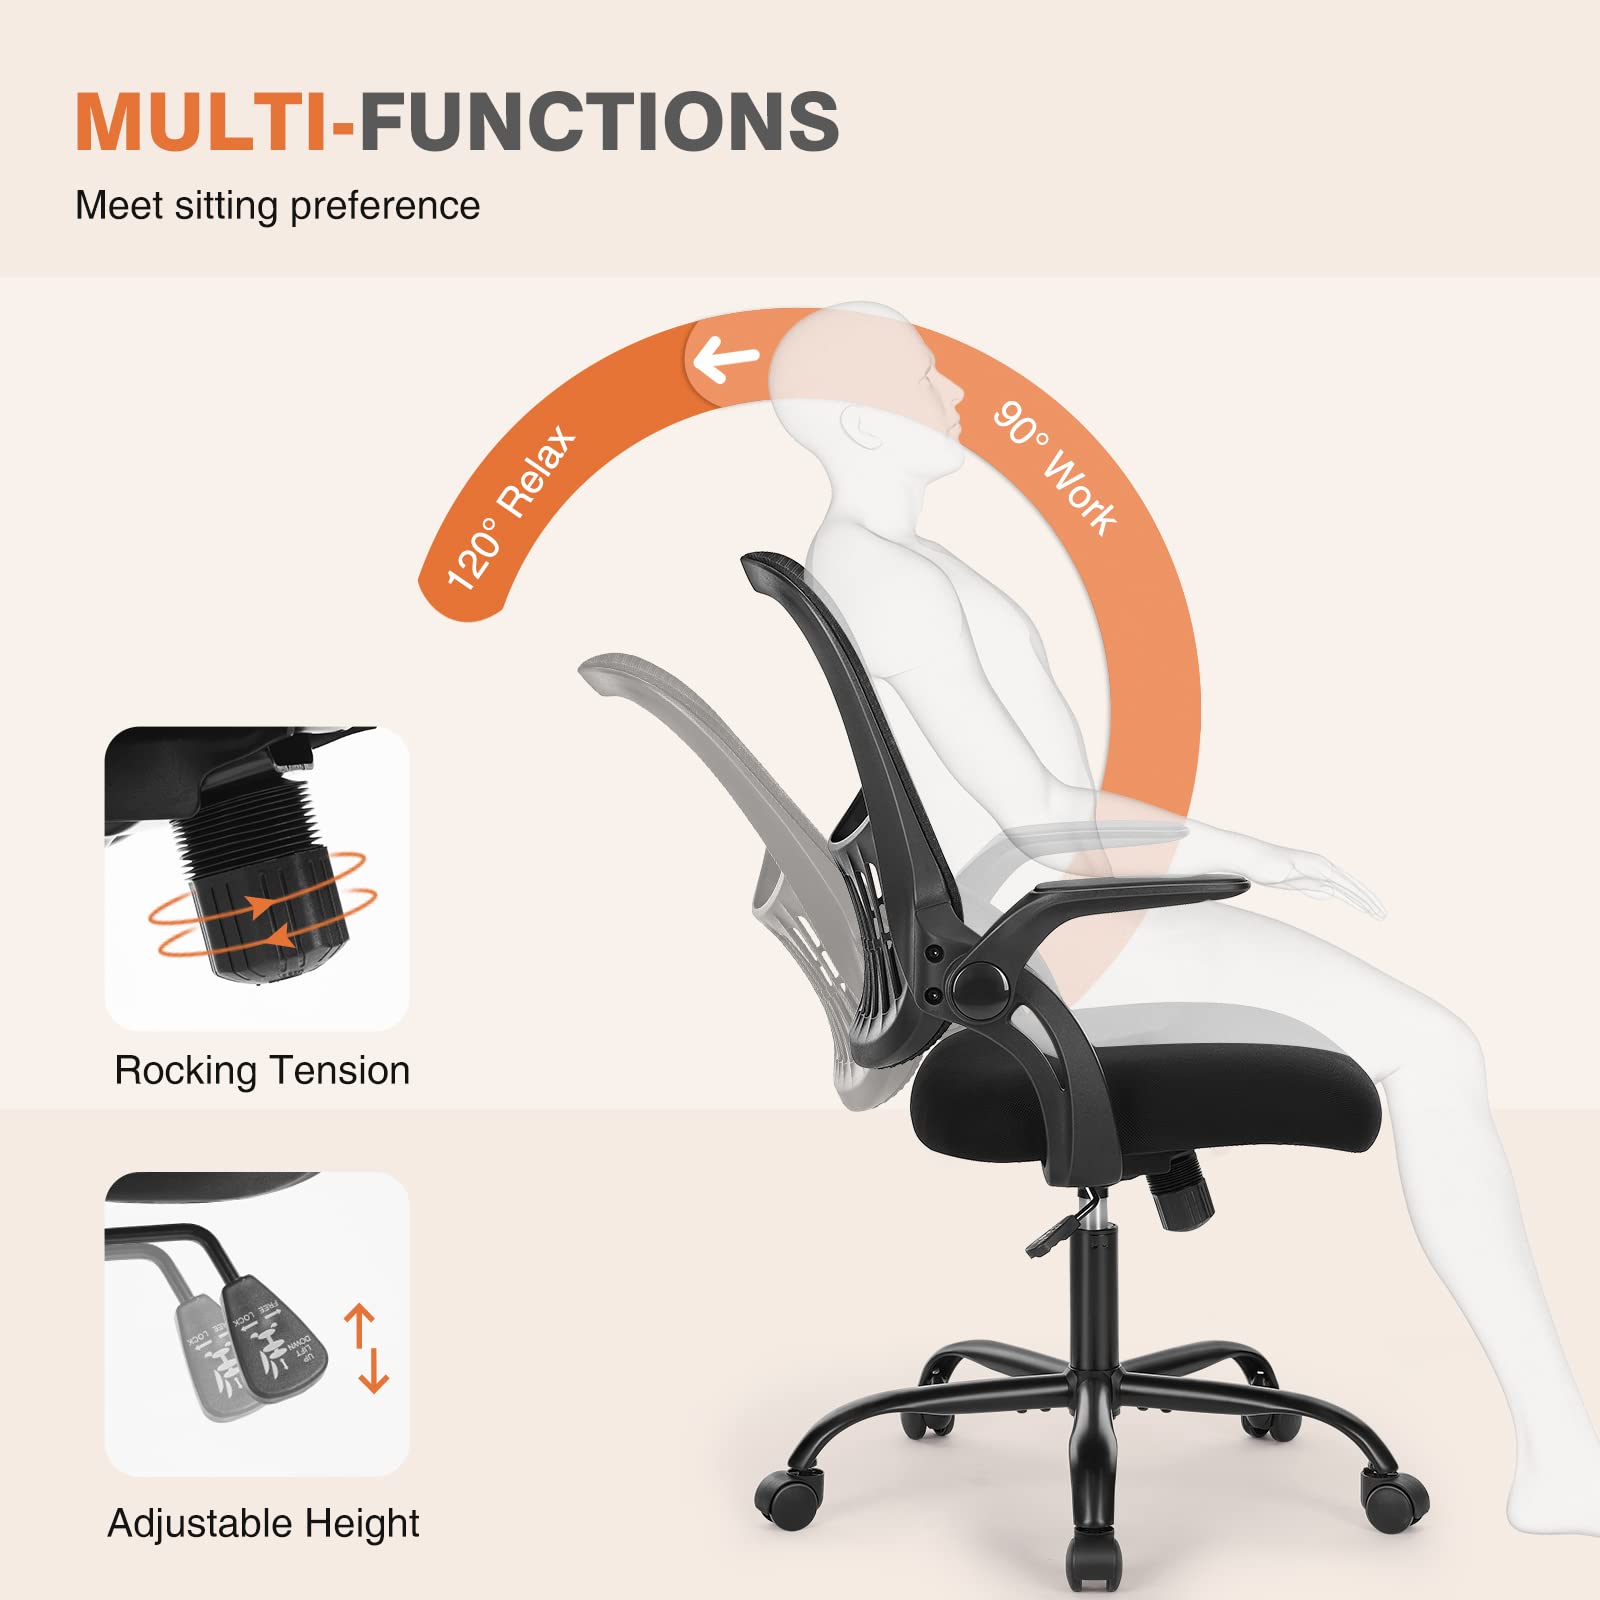 Yoyomax Office Chair, Ergonomic Home Office Desk Chairs, Computer Chair with Comfortable Armrests, Mesh Desk Chairs with Wheels, Mid-Back Task Chair with Lumbar Support - image 4 of 9